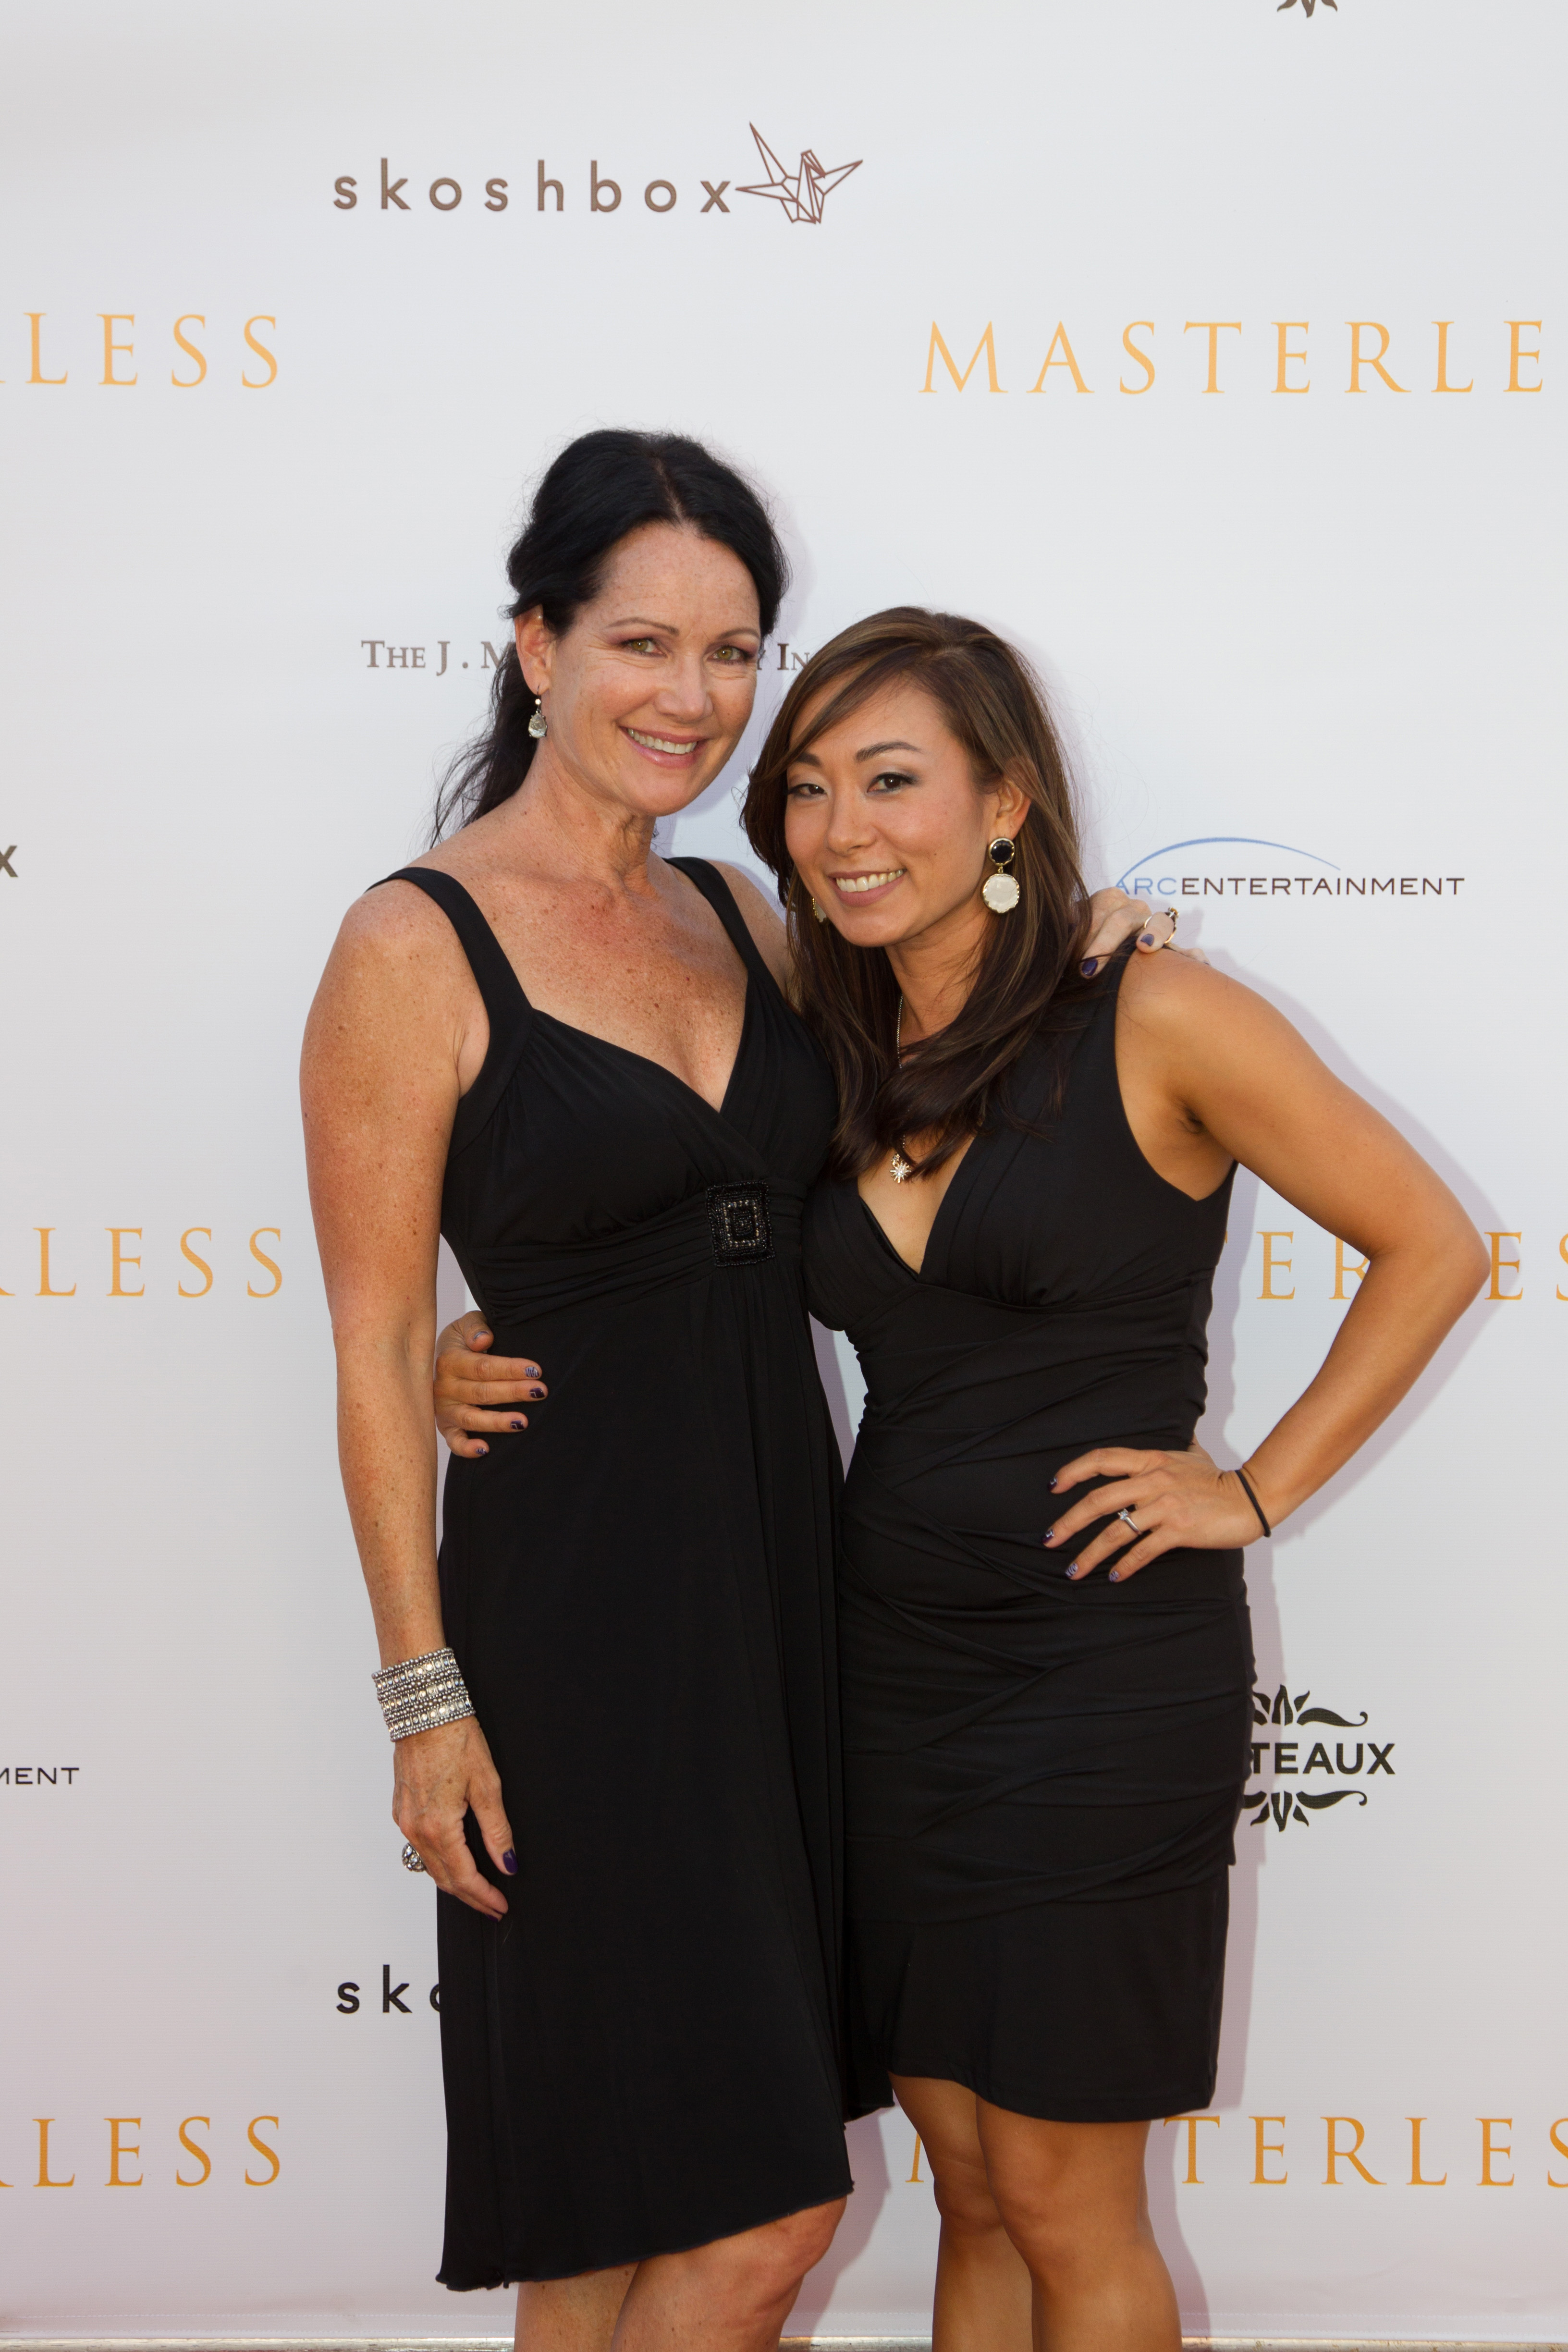 Masterless Premiere Egyptian Theatre Sept 30, 2015 with Claire Yorita Lee